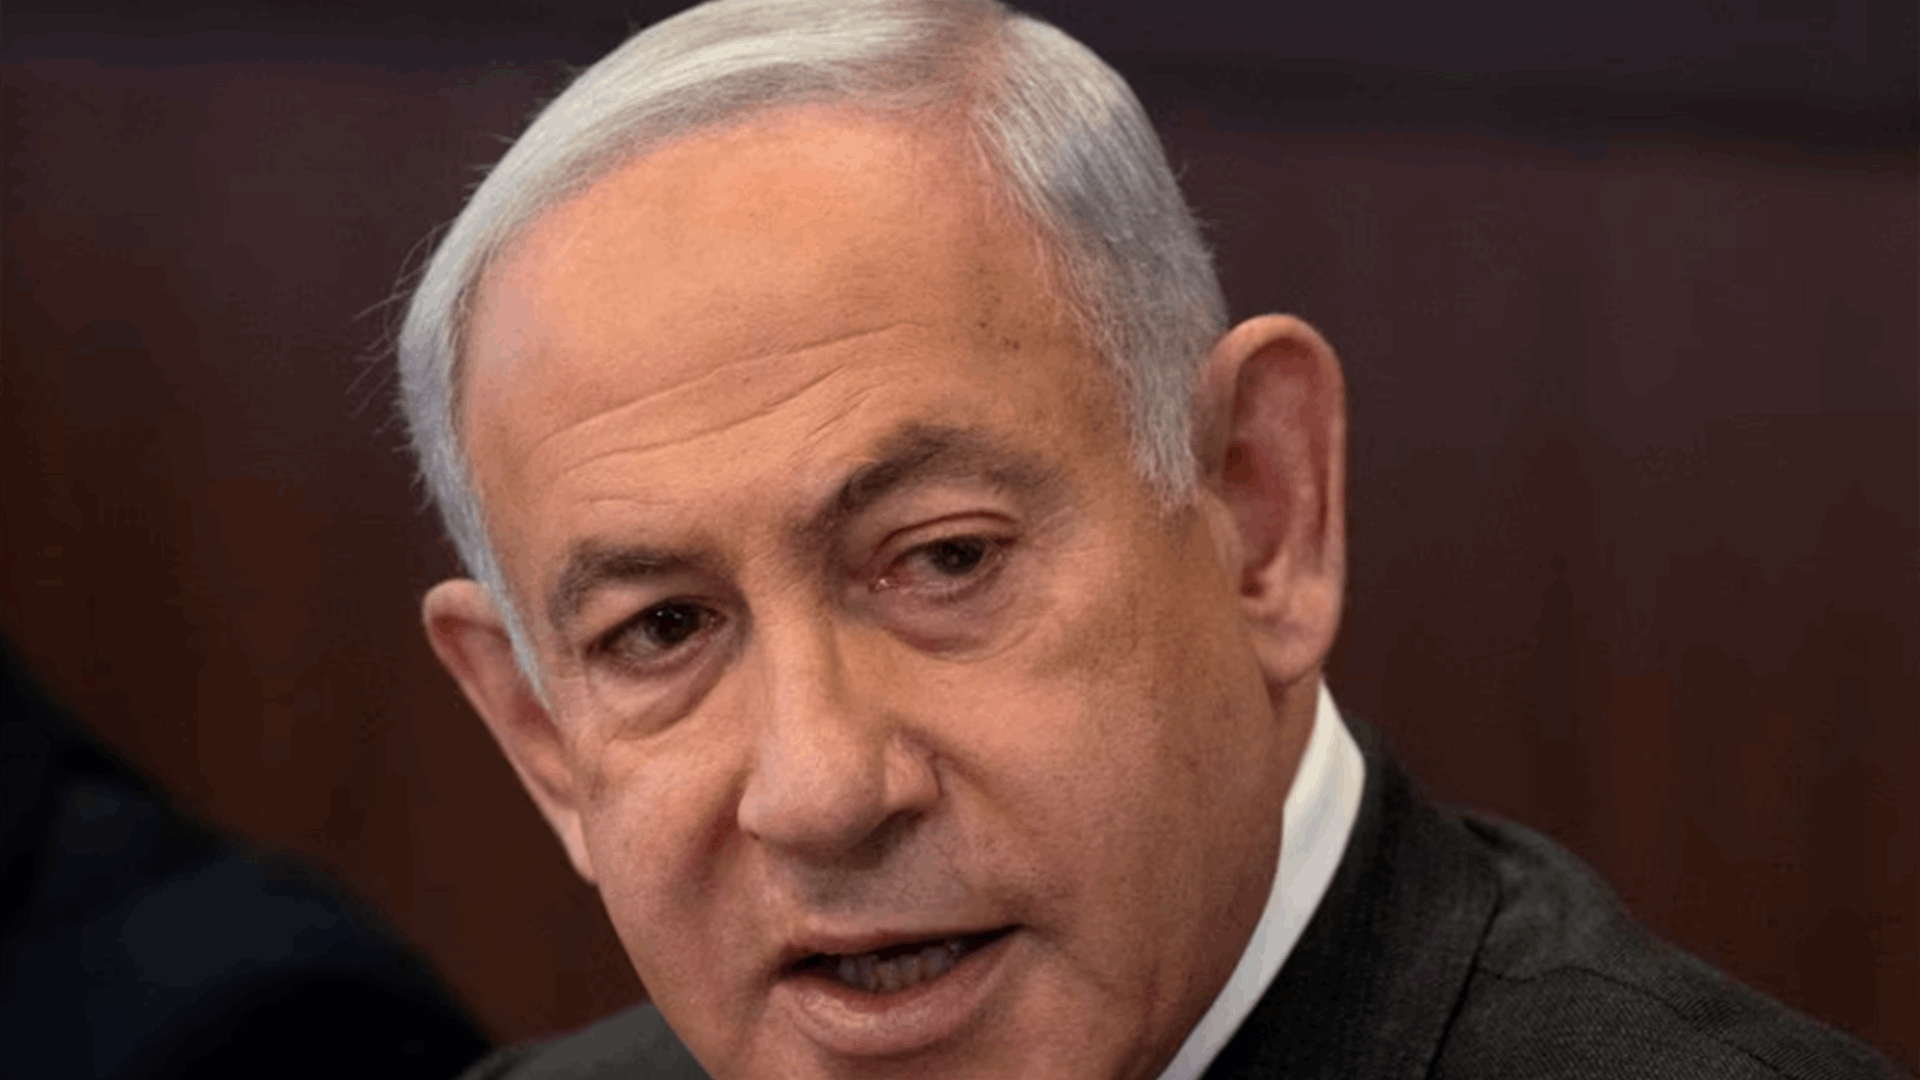 No White House visit for Israel&#39;s Netanyahu as US concern rises